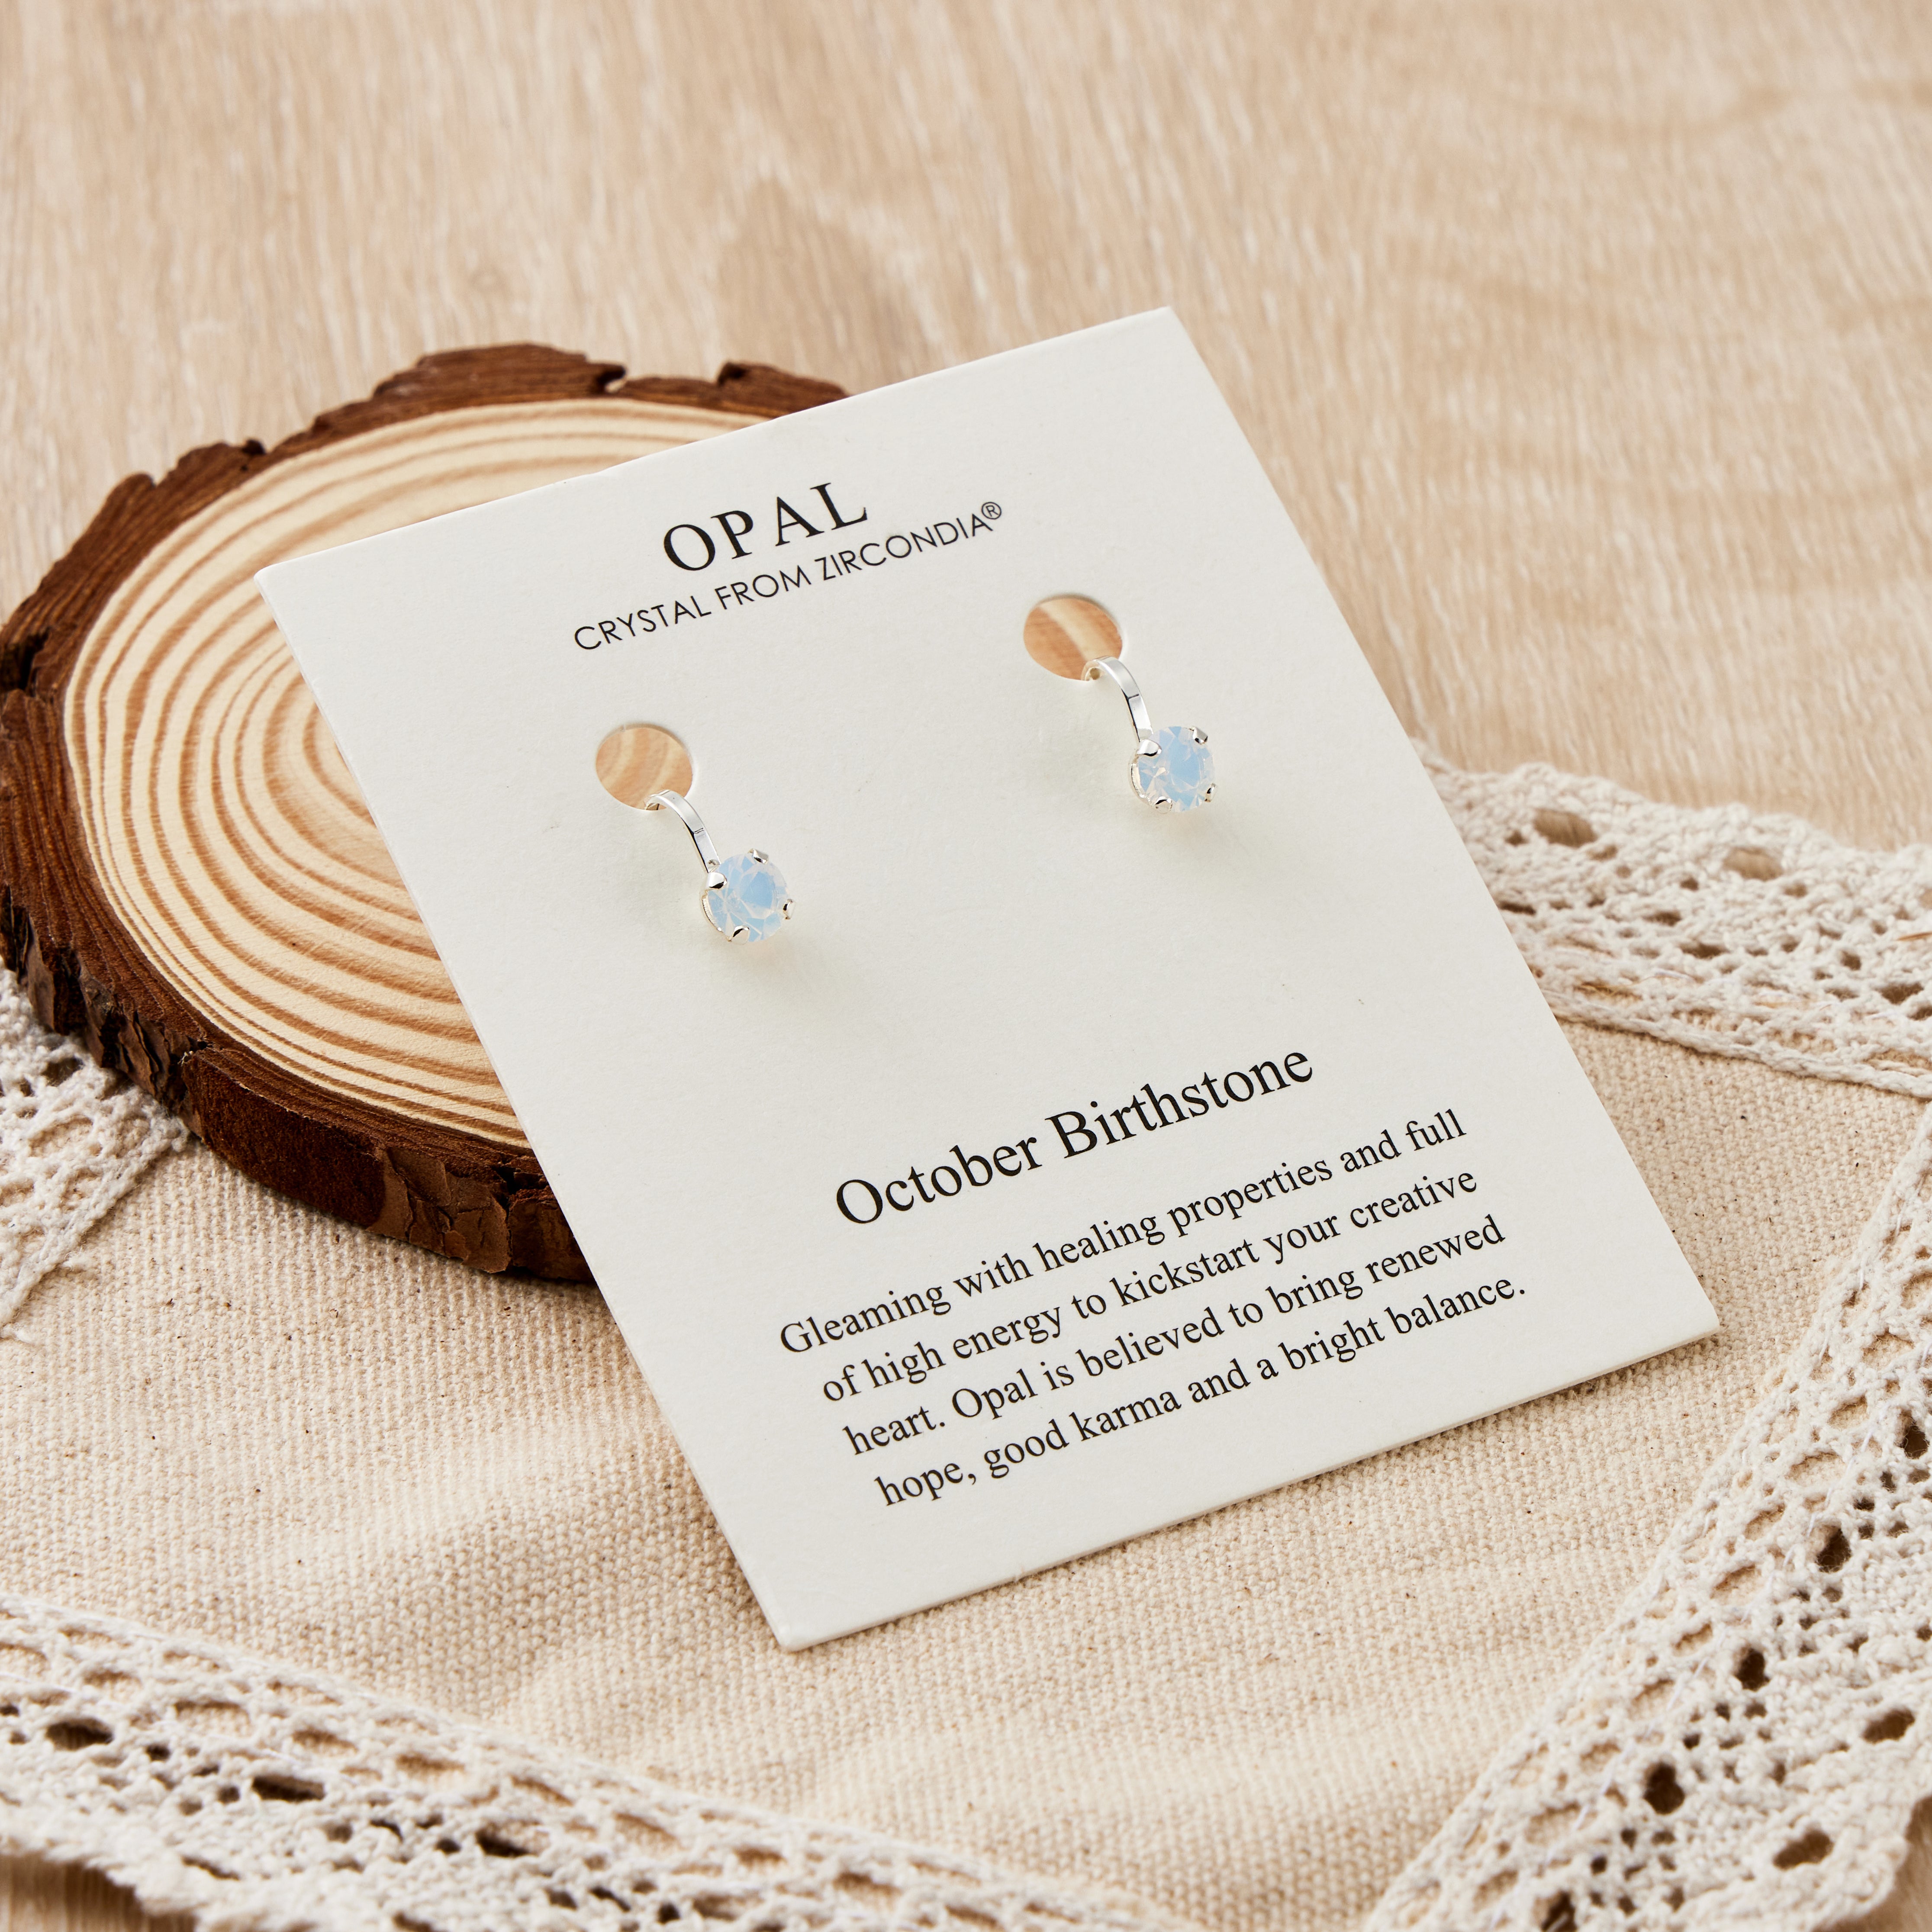 October (White Opal) Birthstone Clip On Earrings Created with Zircondia® Crystals